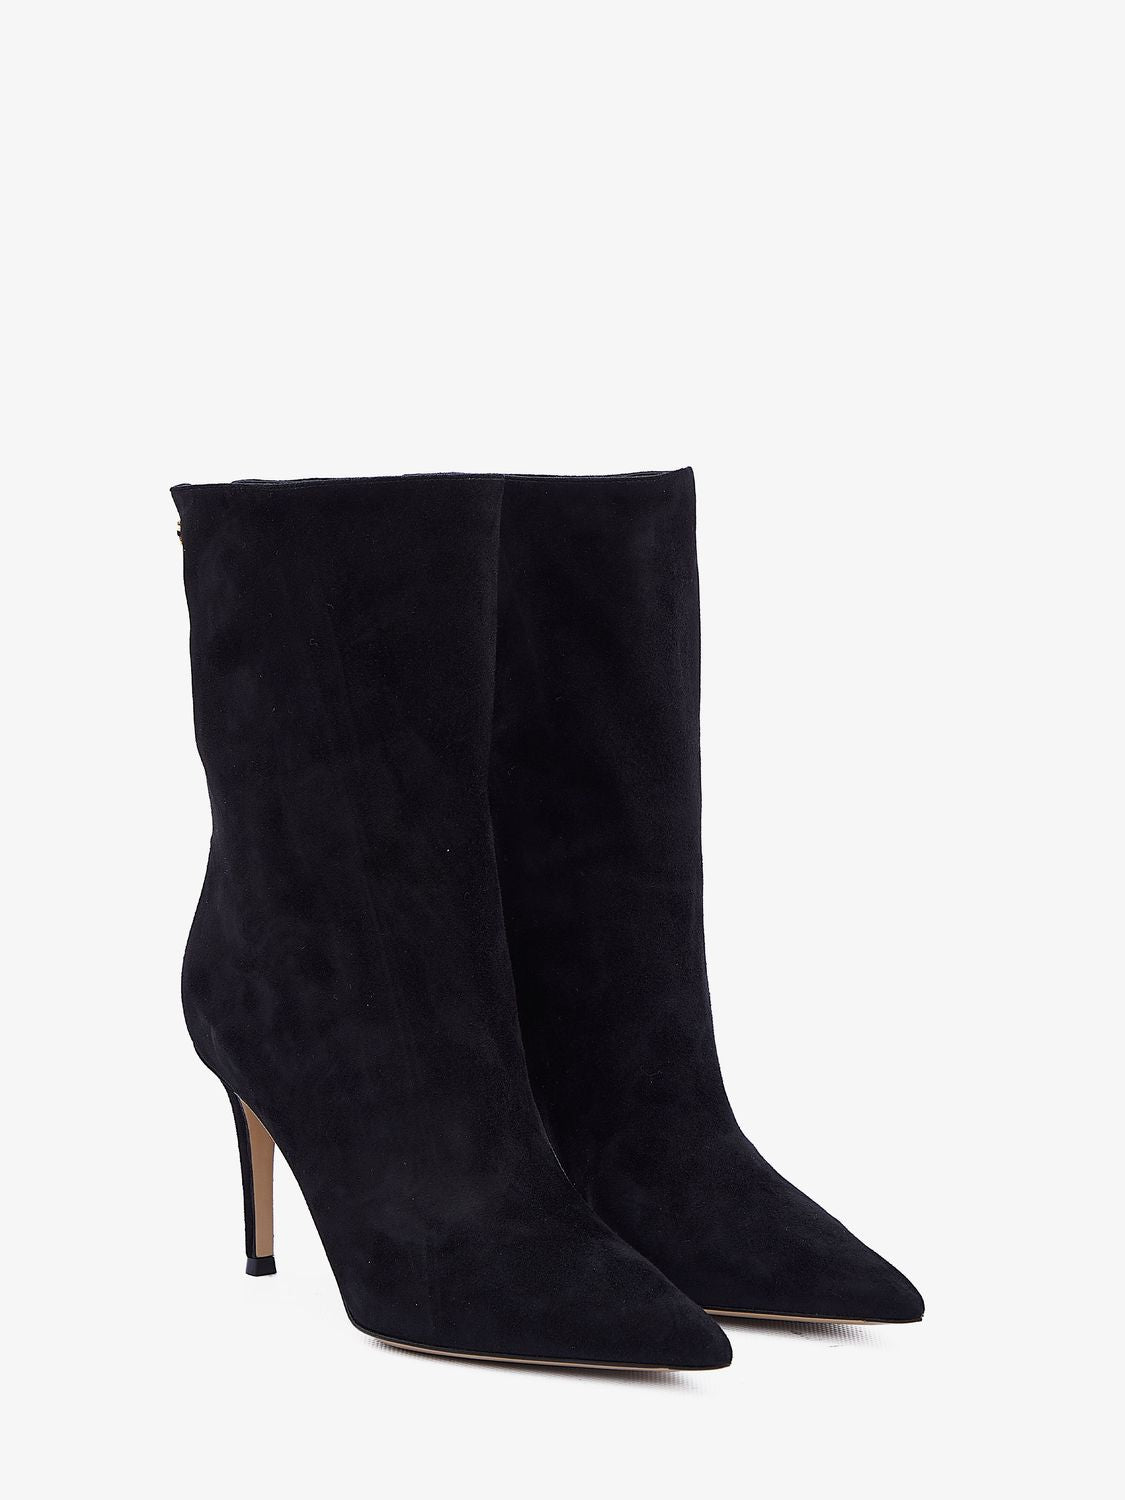 Shop Gianvito Rossi Elegant Black Suede Boots With Gold-tone Logo Detail And Thin Heel